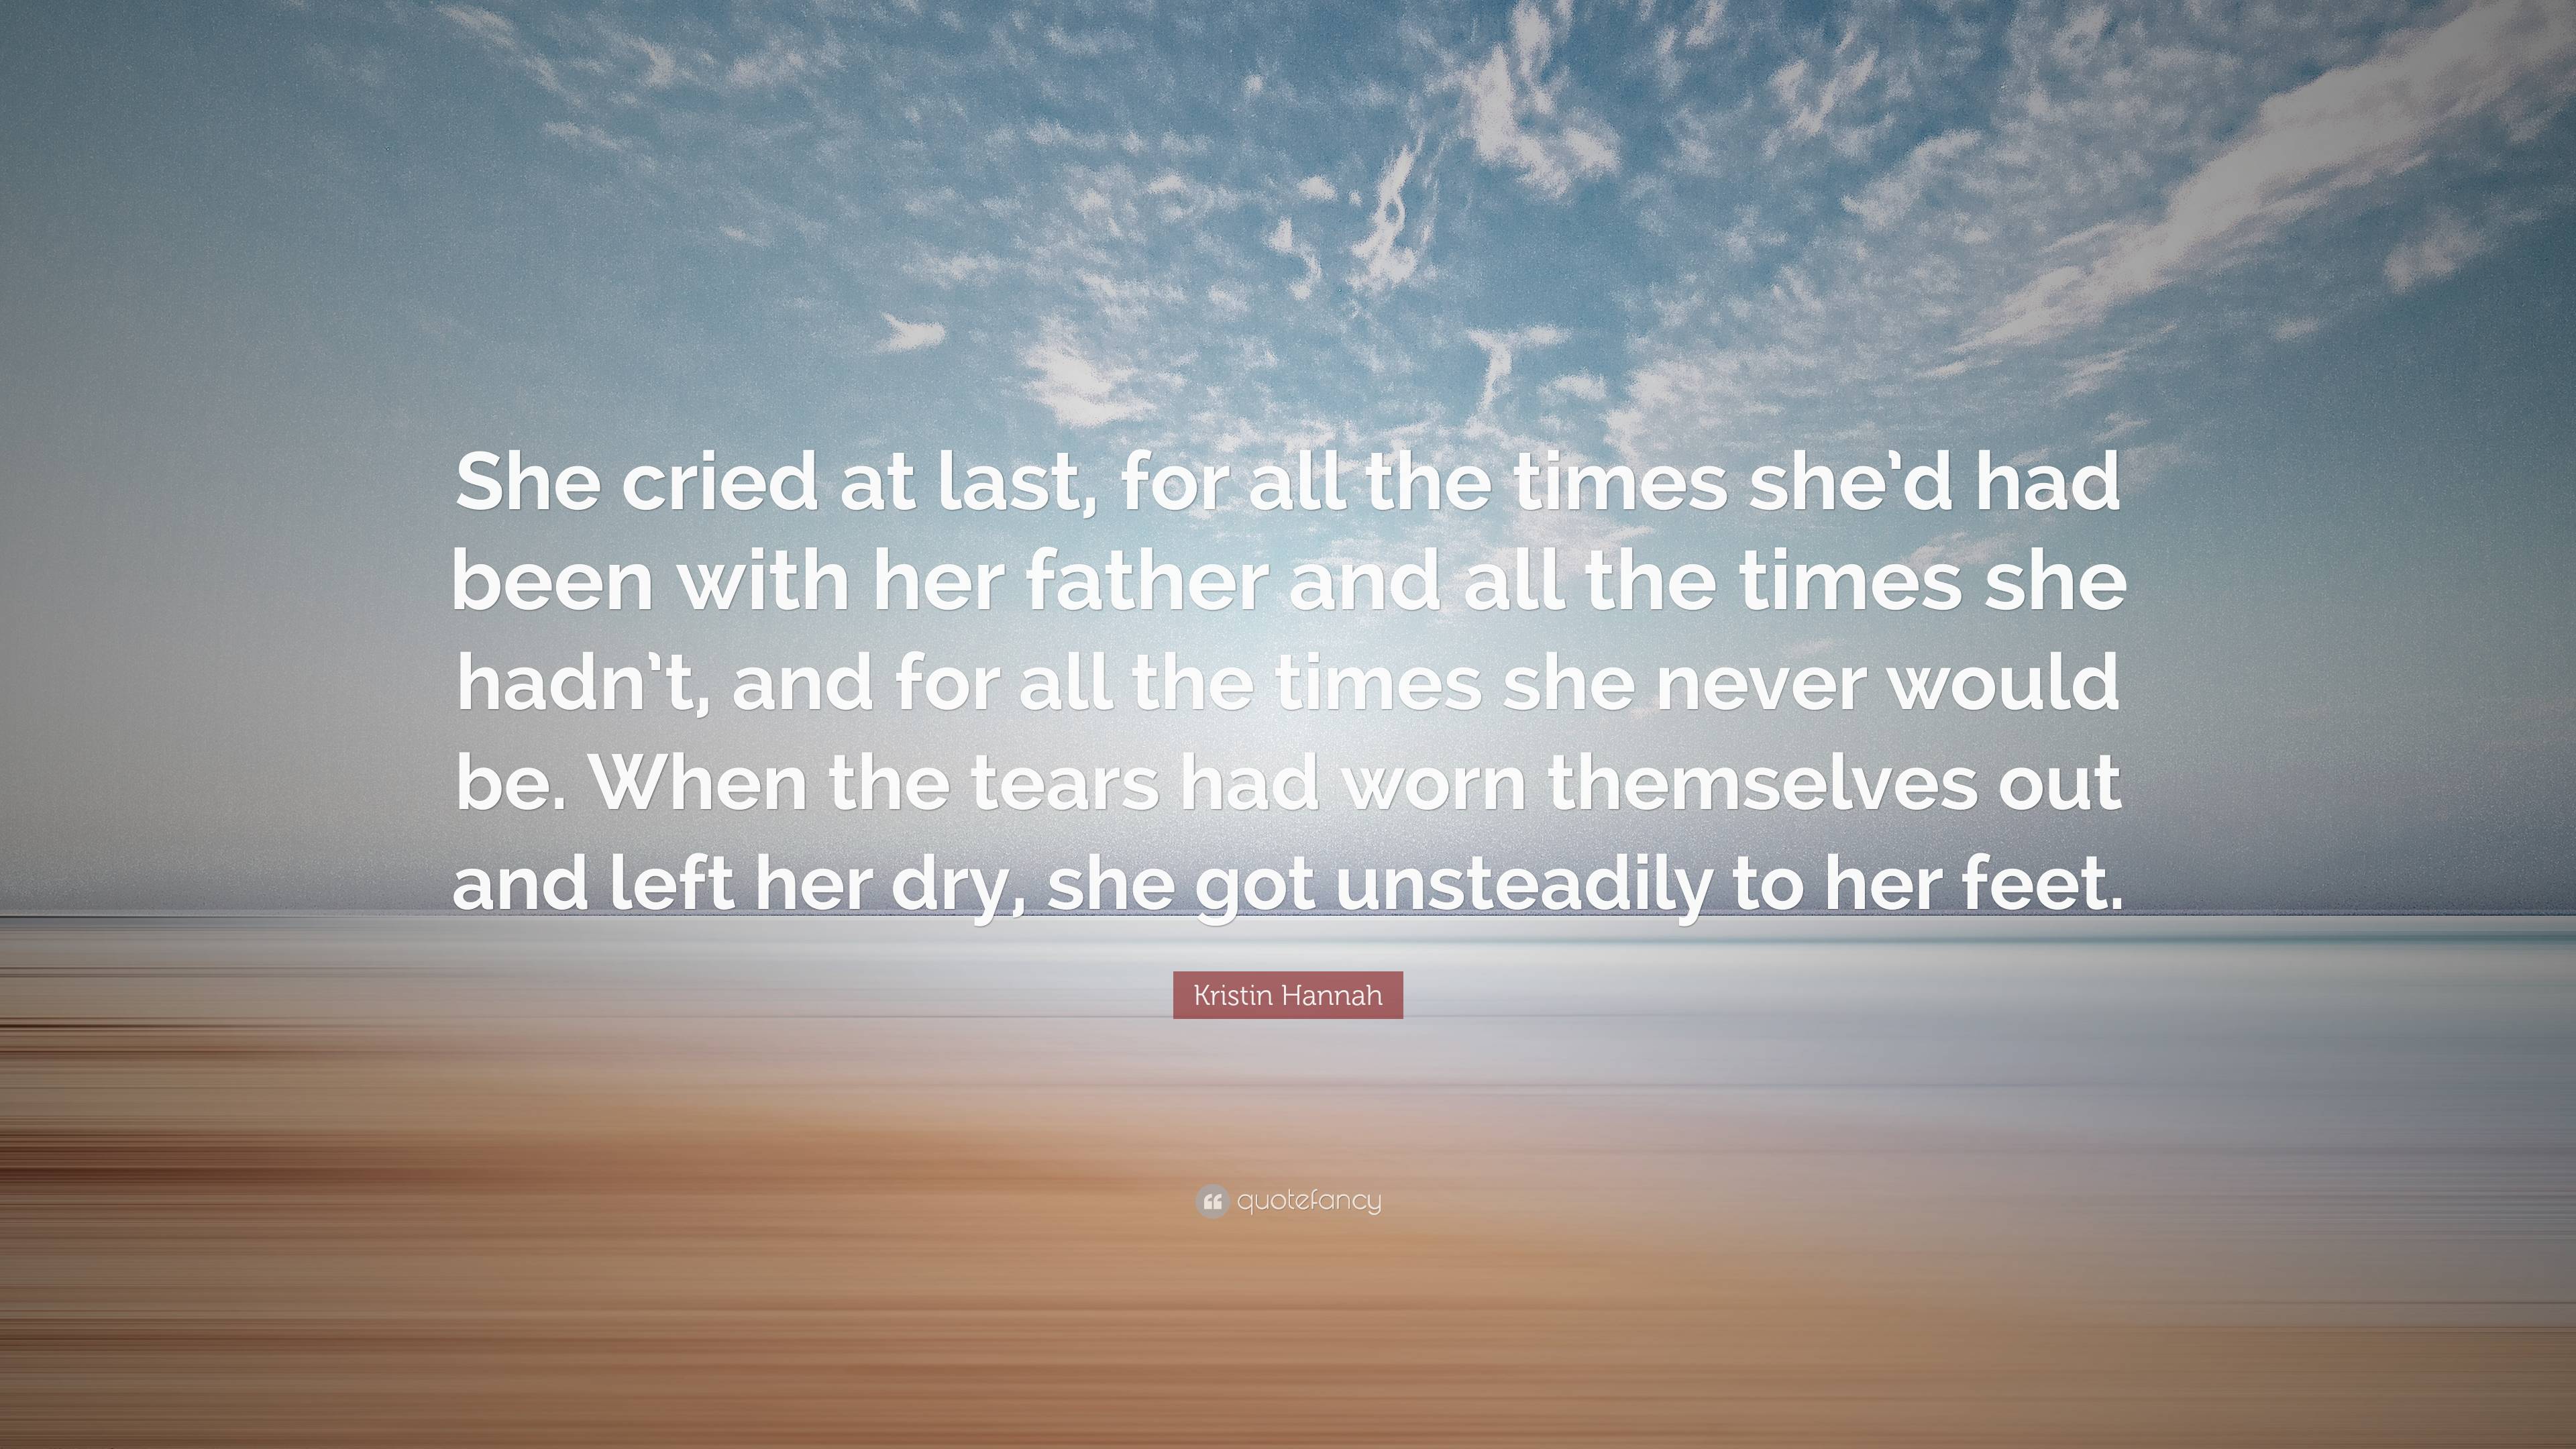 Kristin Hannah Quote: “She cried at last, for all the times she’d had ...